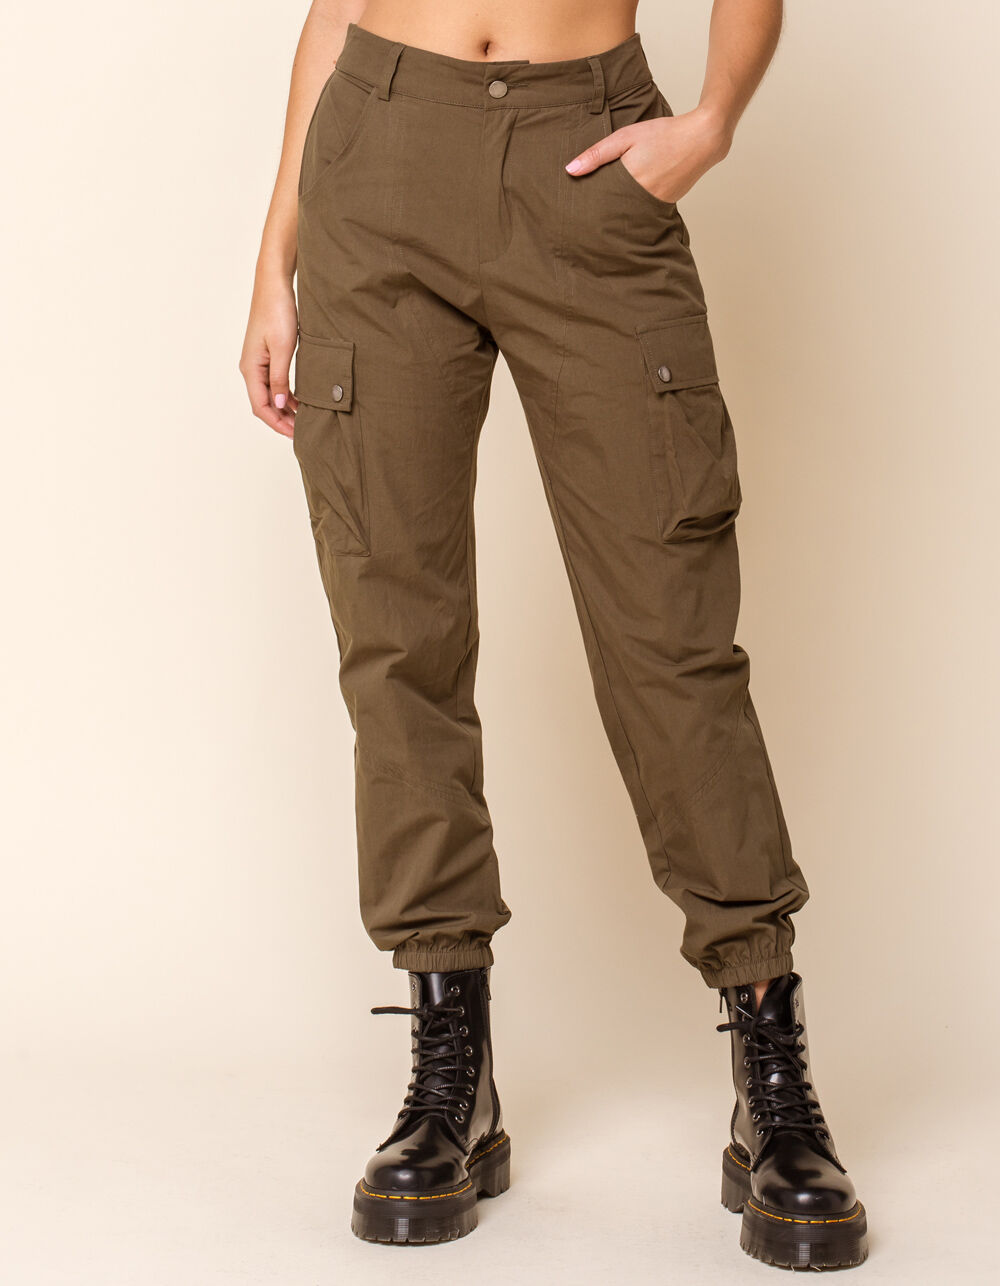 WEST OF MELROSE Roger That Womens Cargo Jogger Pants